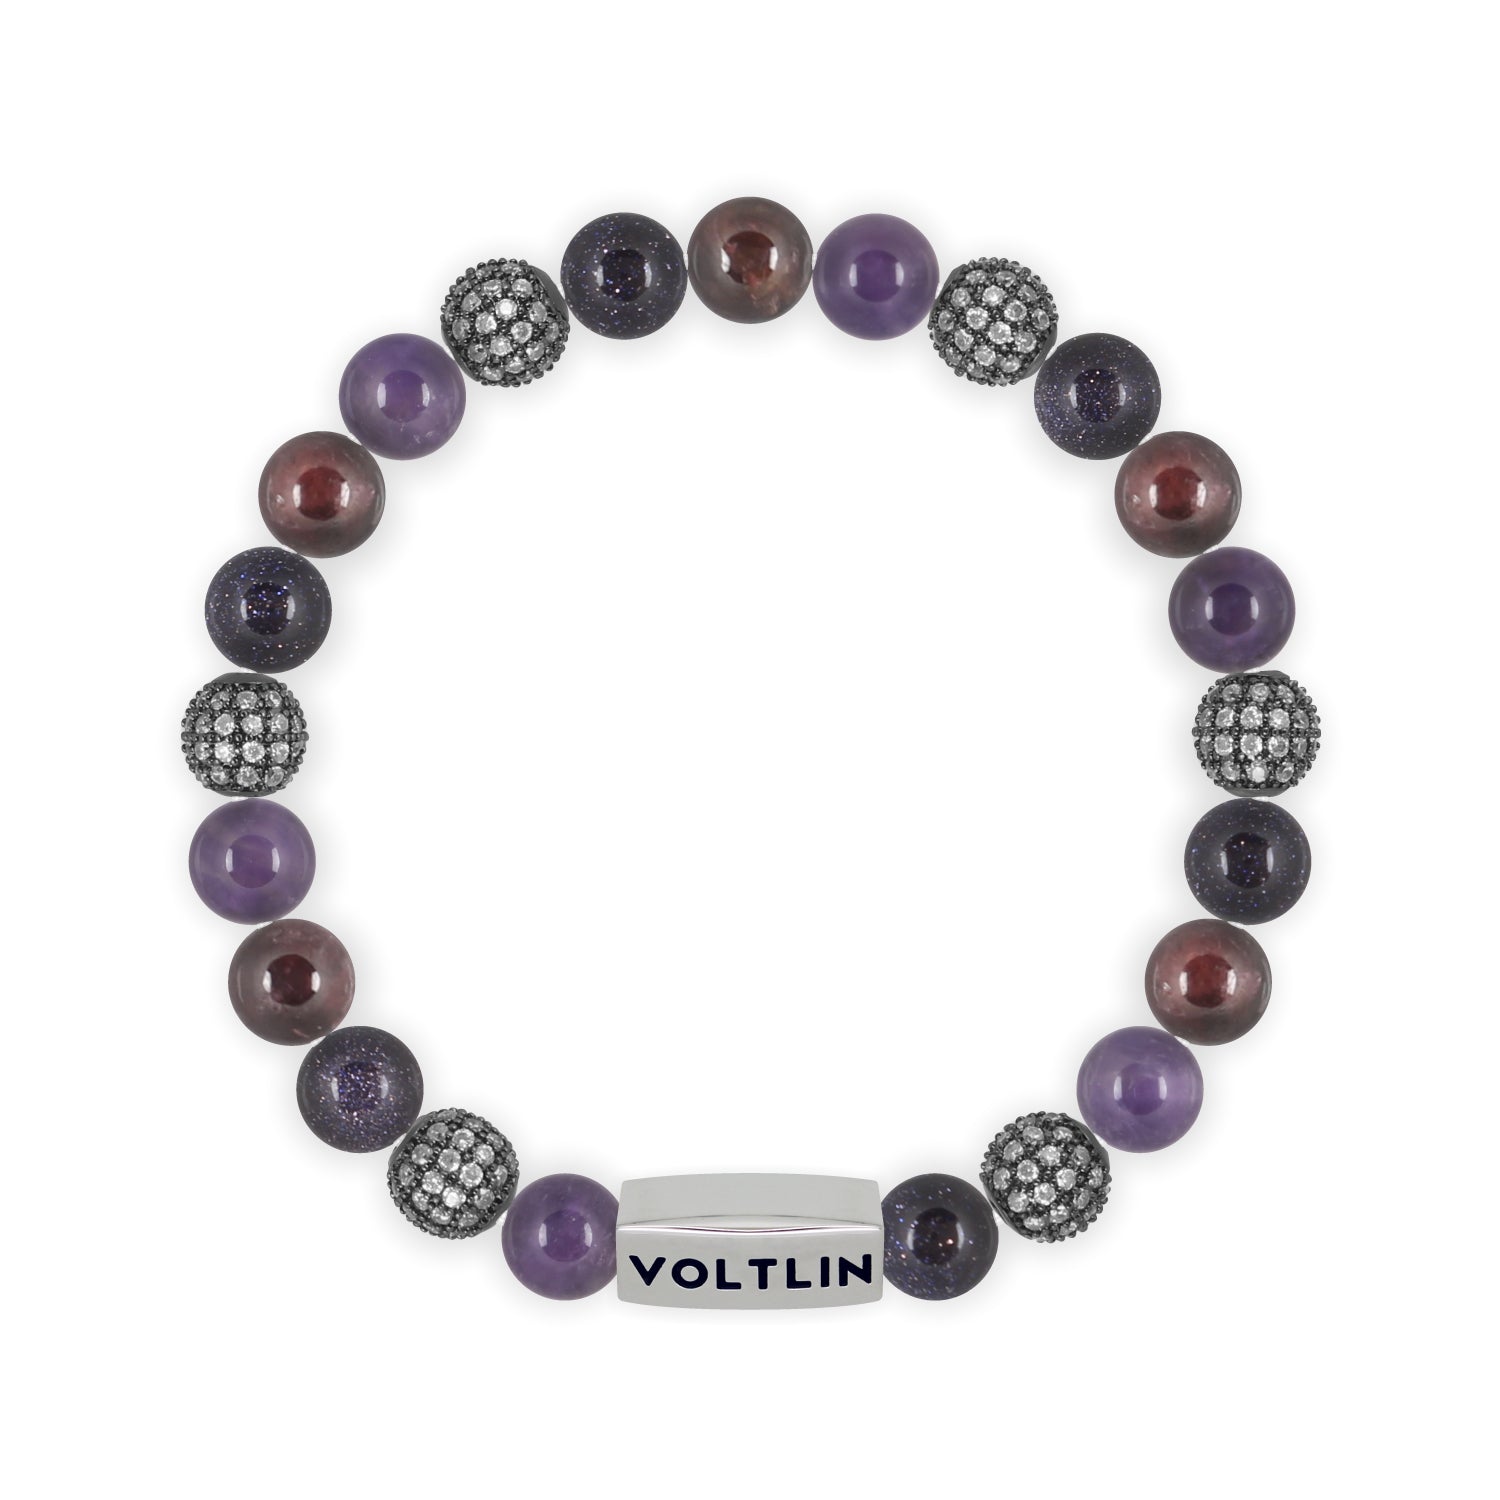 Front view of an 8mm Violet Sirius beaded stretch bracelet featuring Amethyst, Steel Pave, Blue Goldstone, & Smooth Garnet crystal and silver stainless steel logo bead made by Voltlin